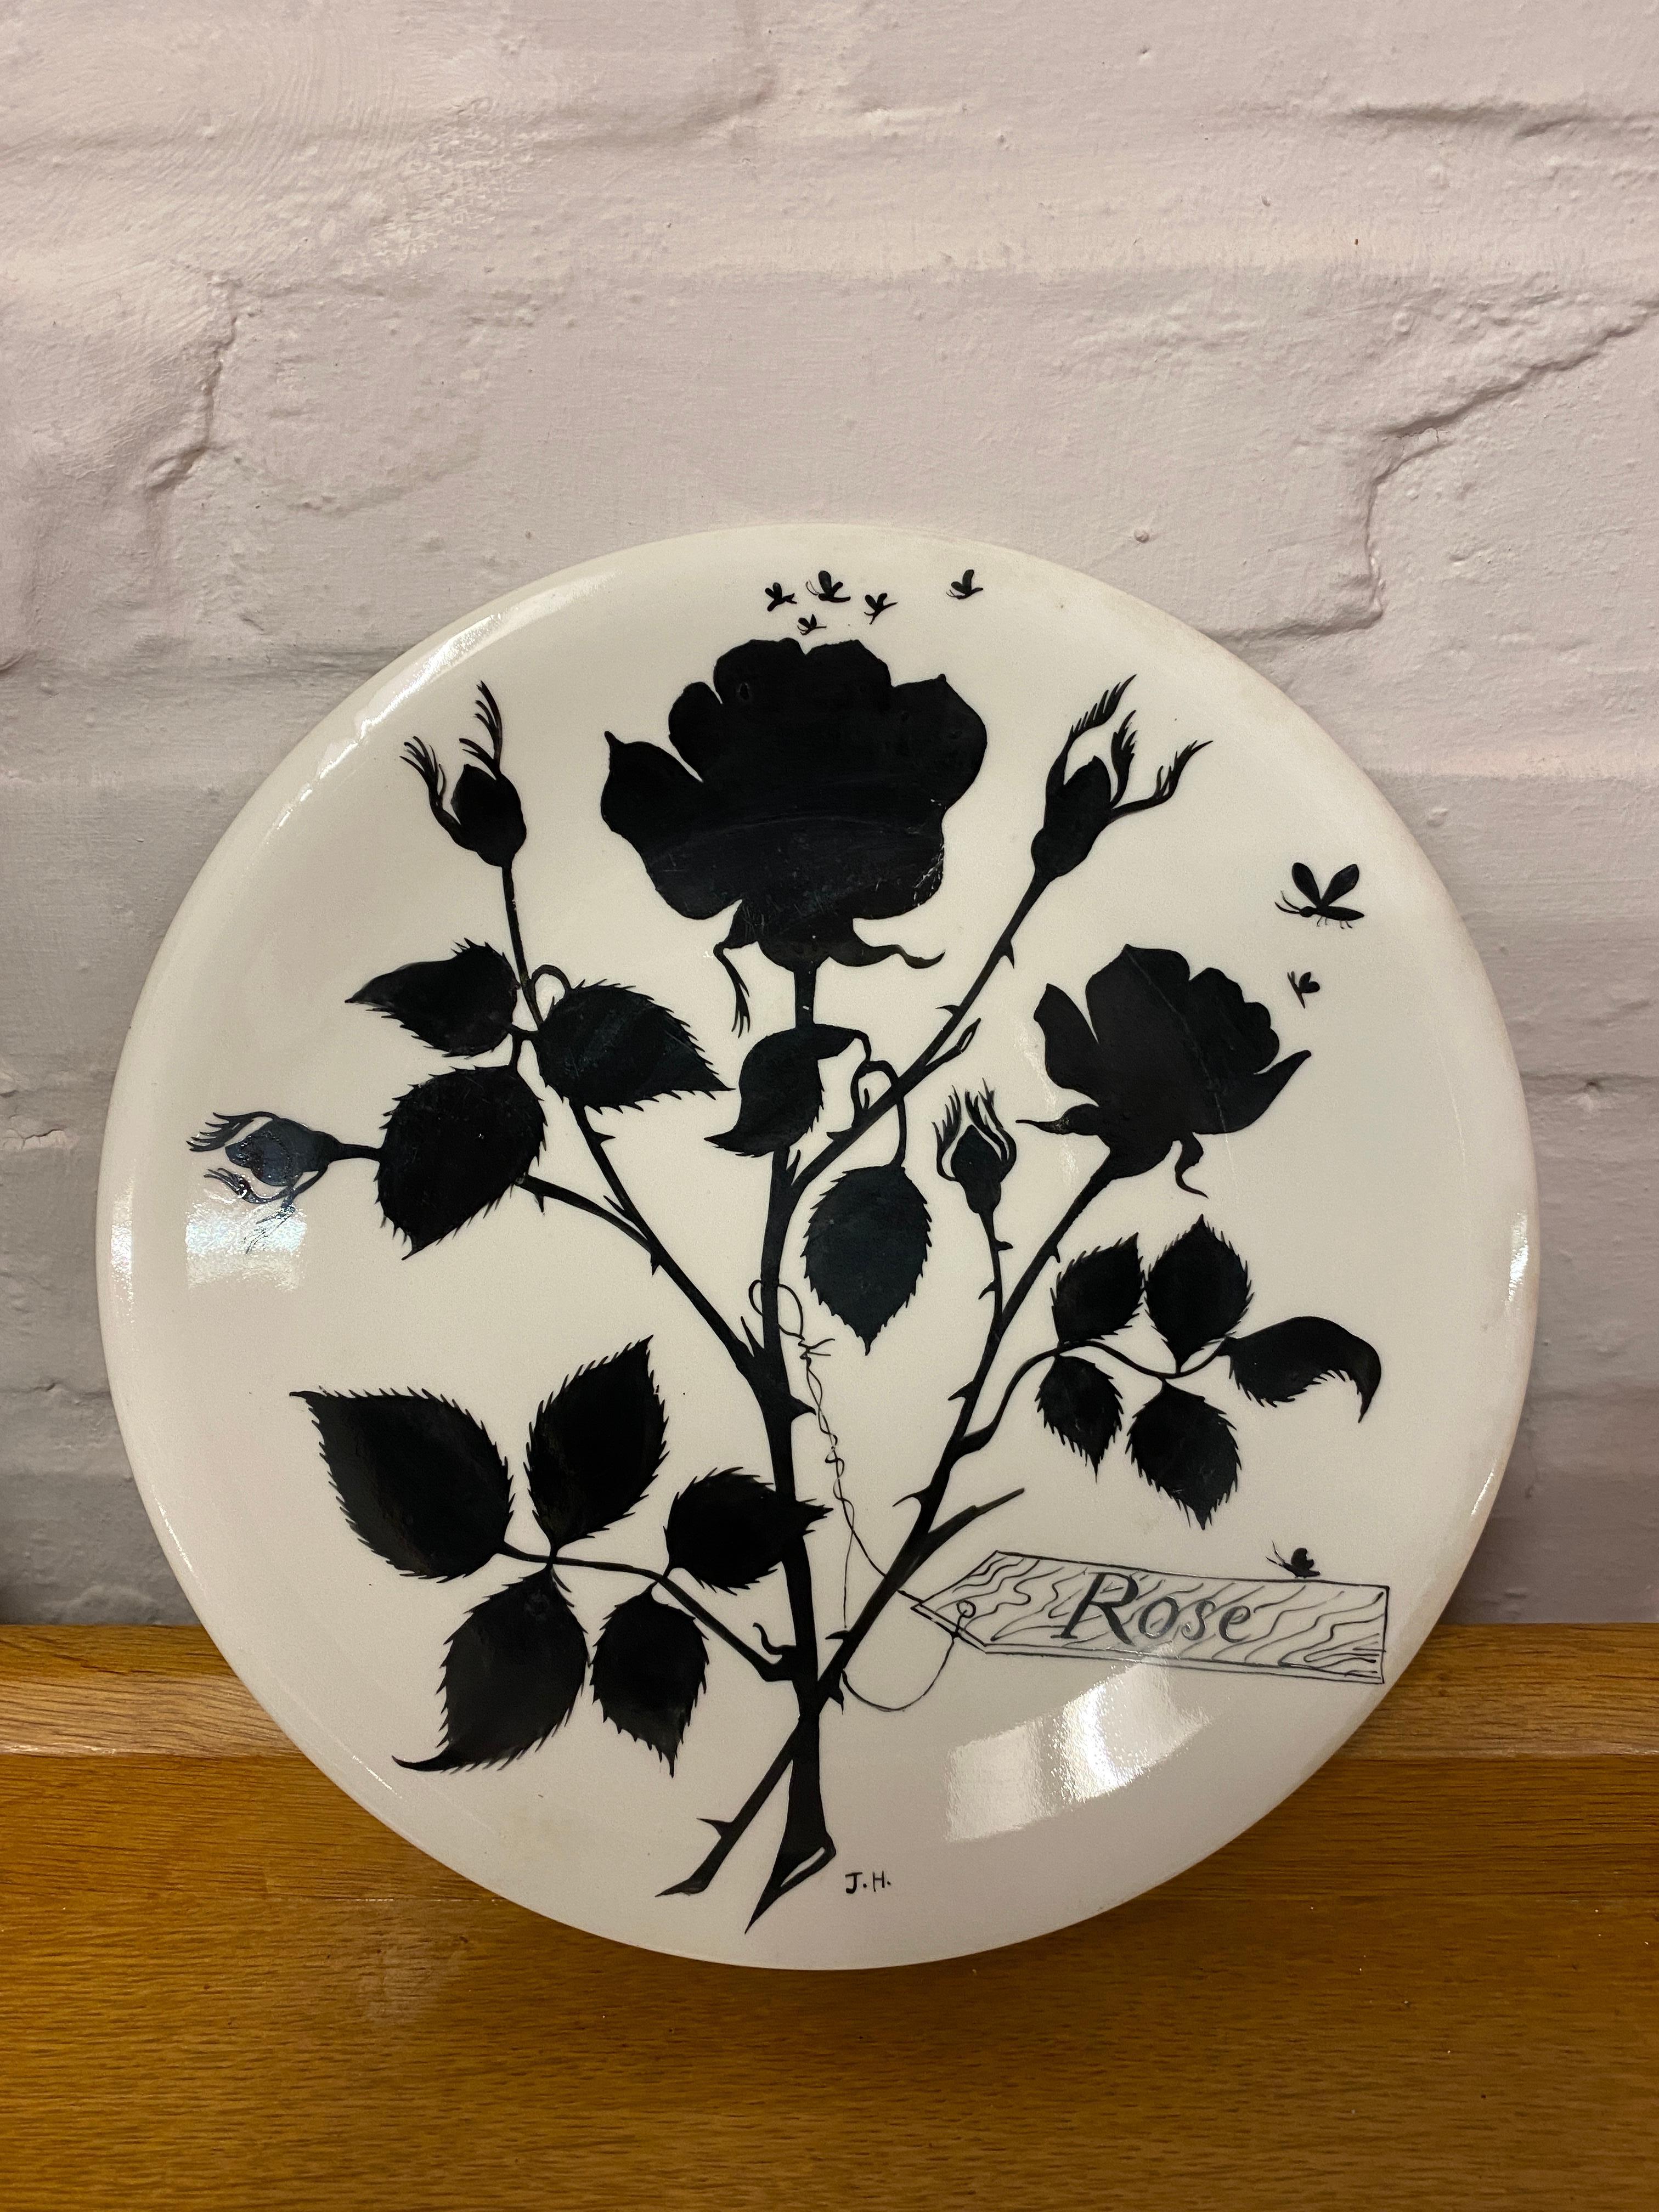 Jeannine Hétreau, plate decorated with stylized rose, for Primavera, under the artistic direction of Colette Gueden, circa 1950.